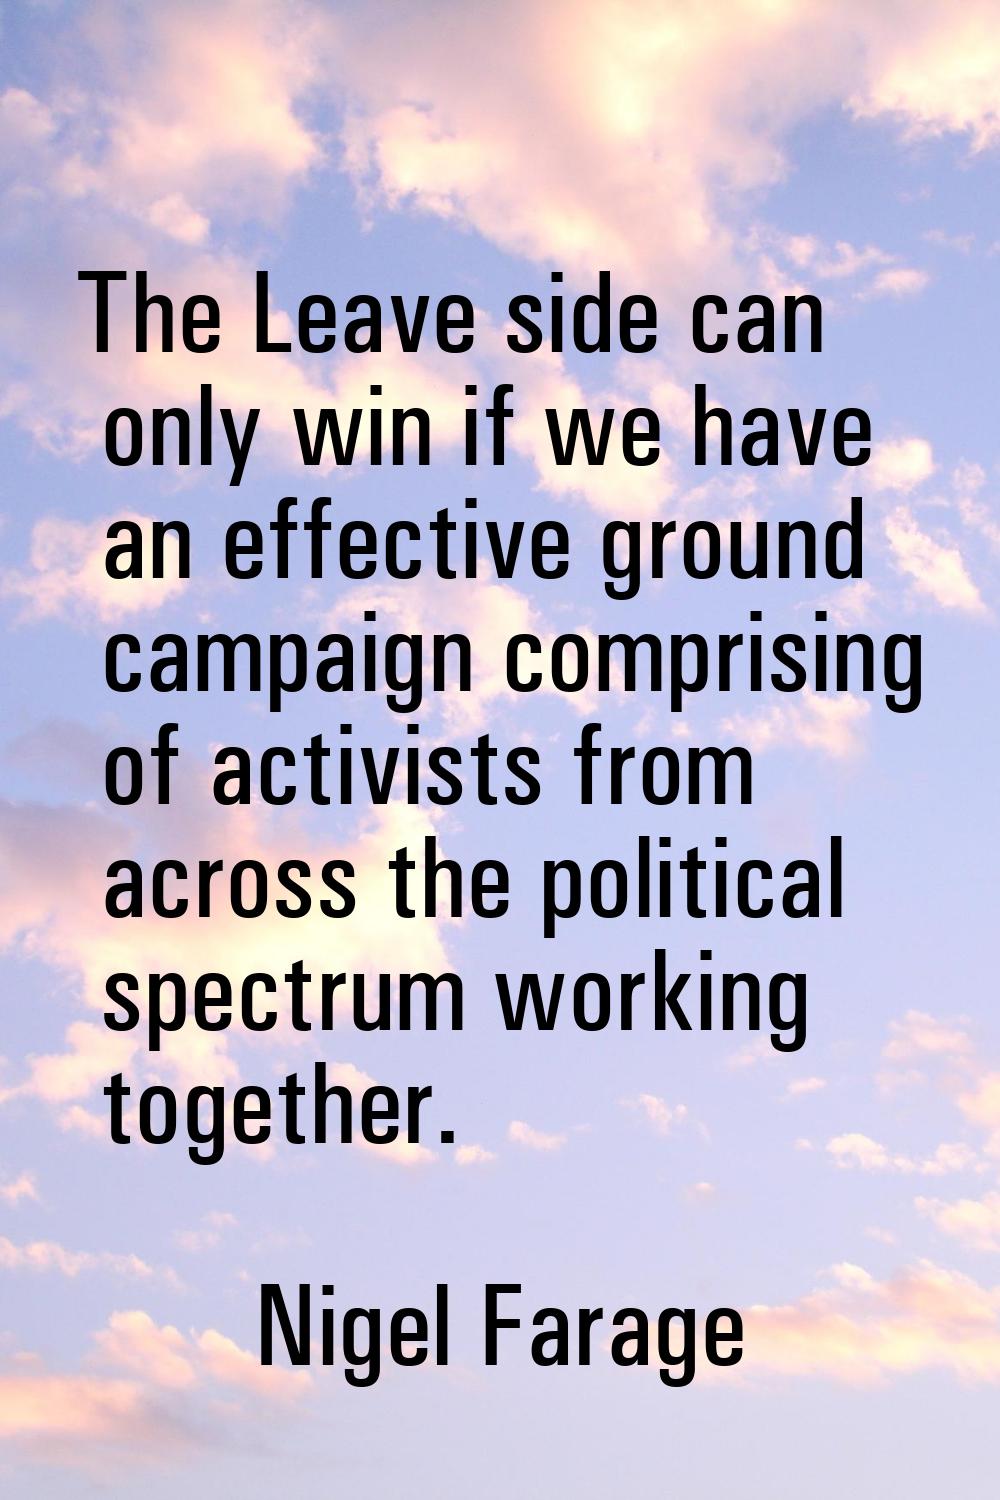 The Leave side can only win if we have an effective ground campaign comprising of activists from ac